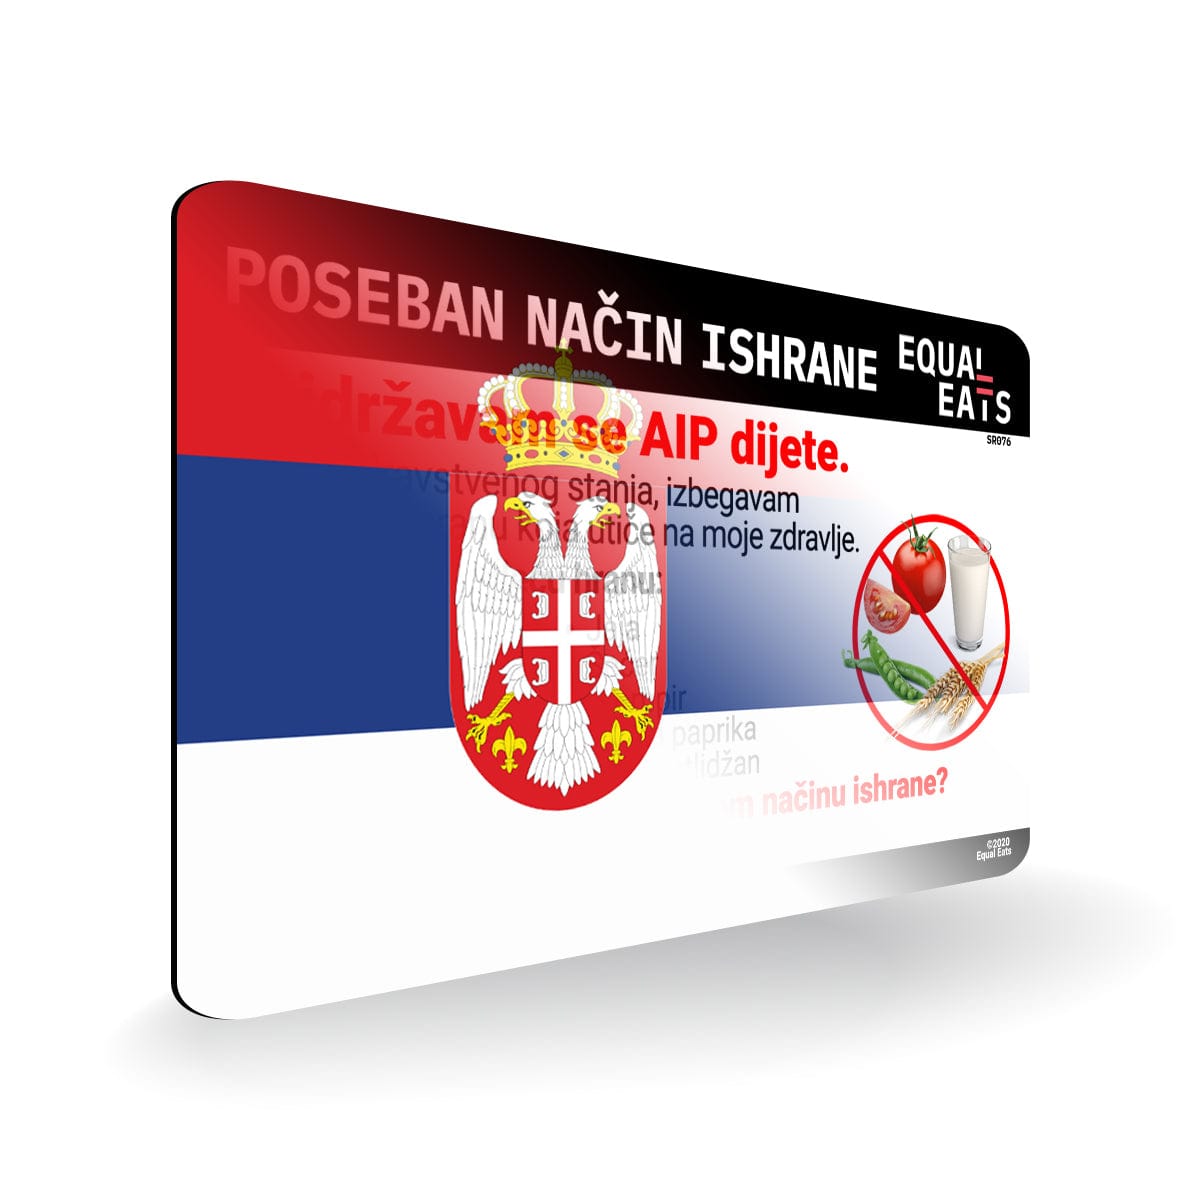 AIP Diet in Serbian. AIP Diet Card for Serbia